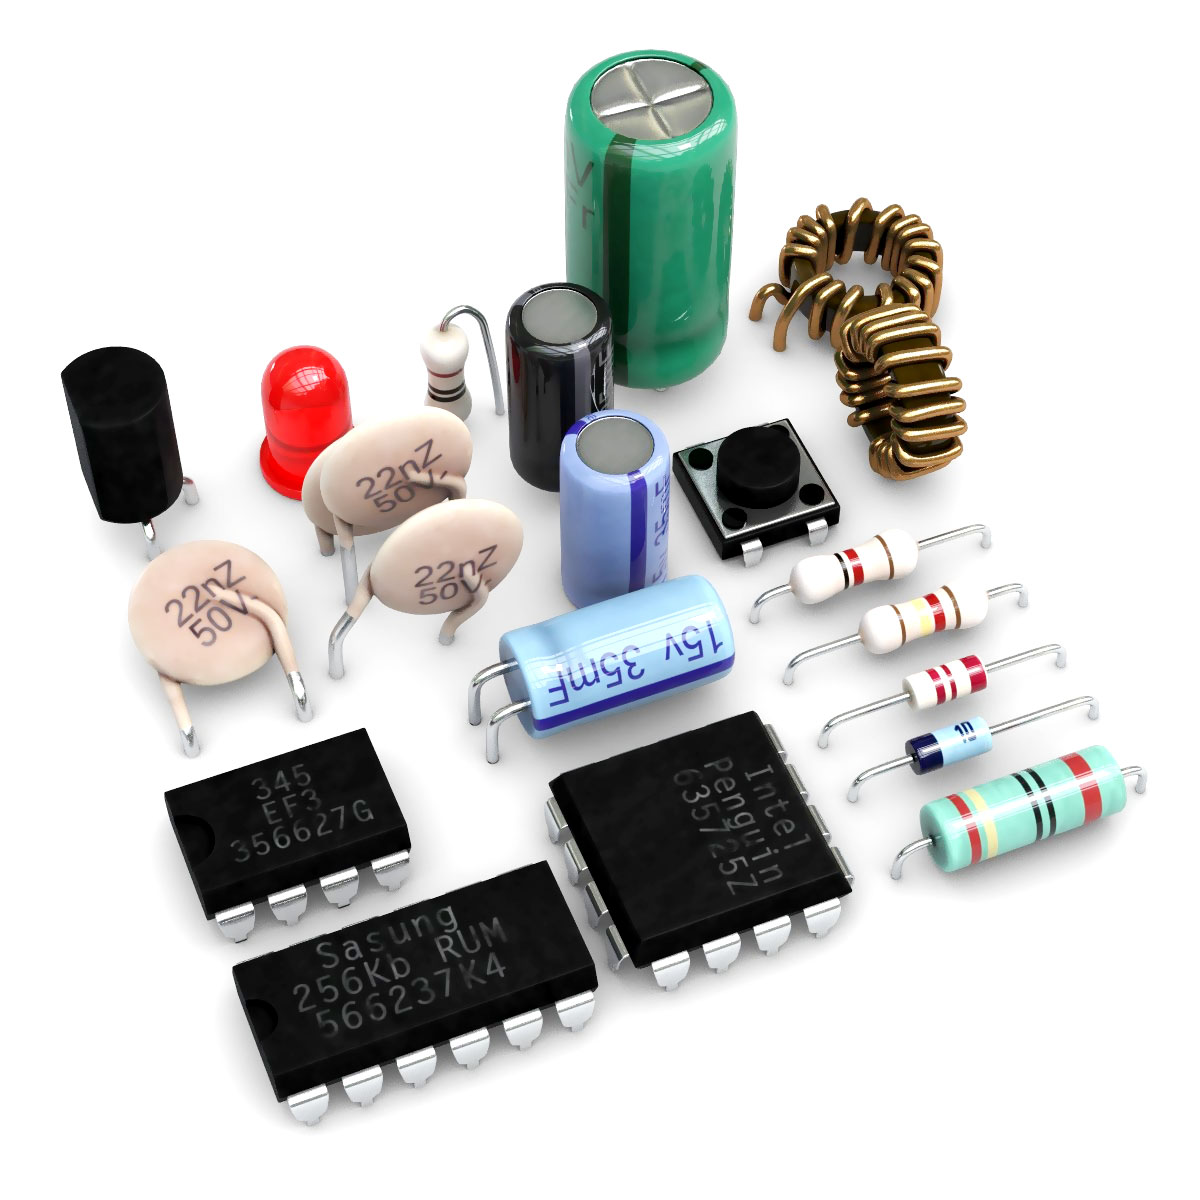 Rich Electronic Components Sourcing